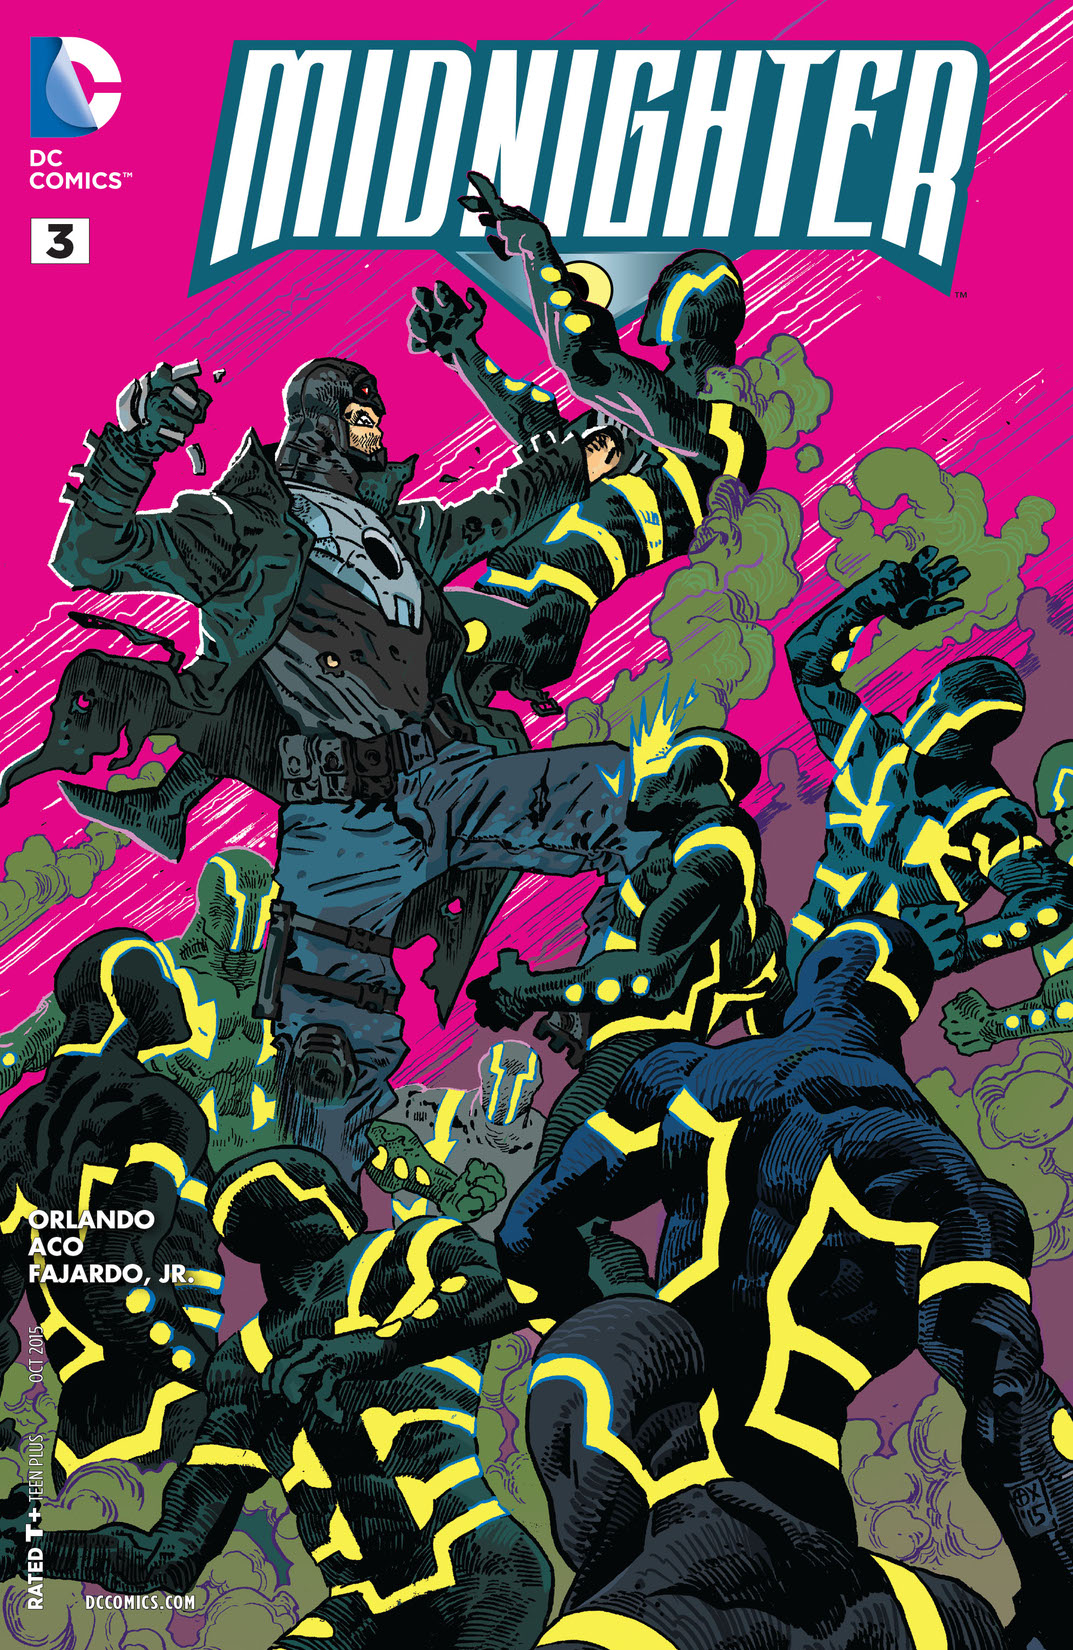 Midnighter (2015-) #3 preview images